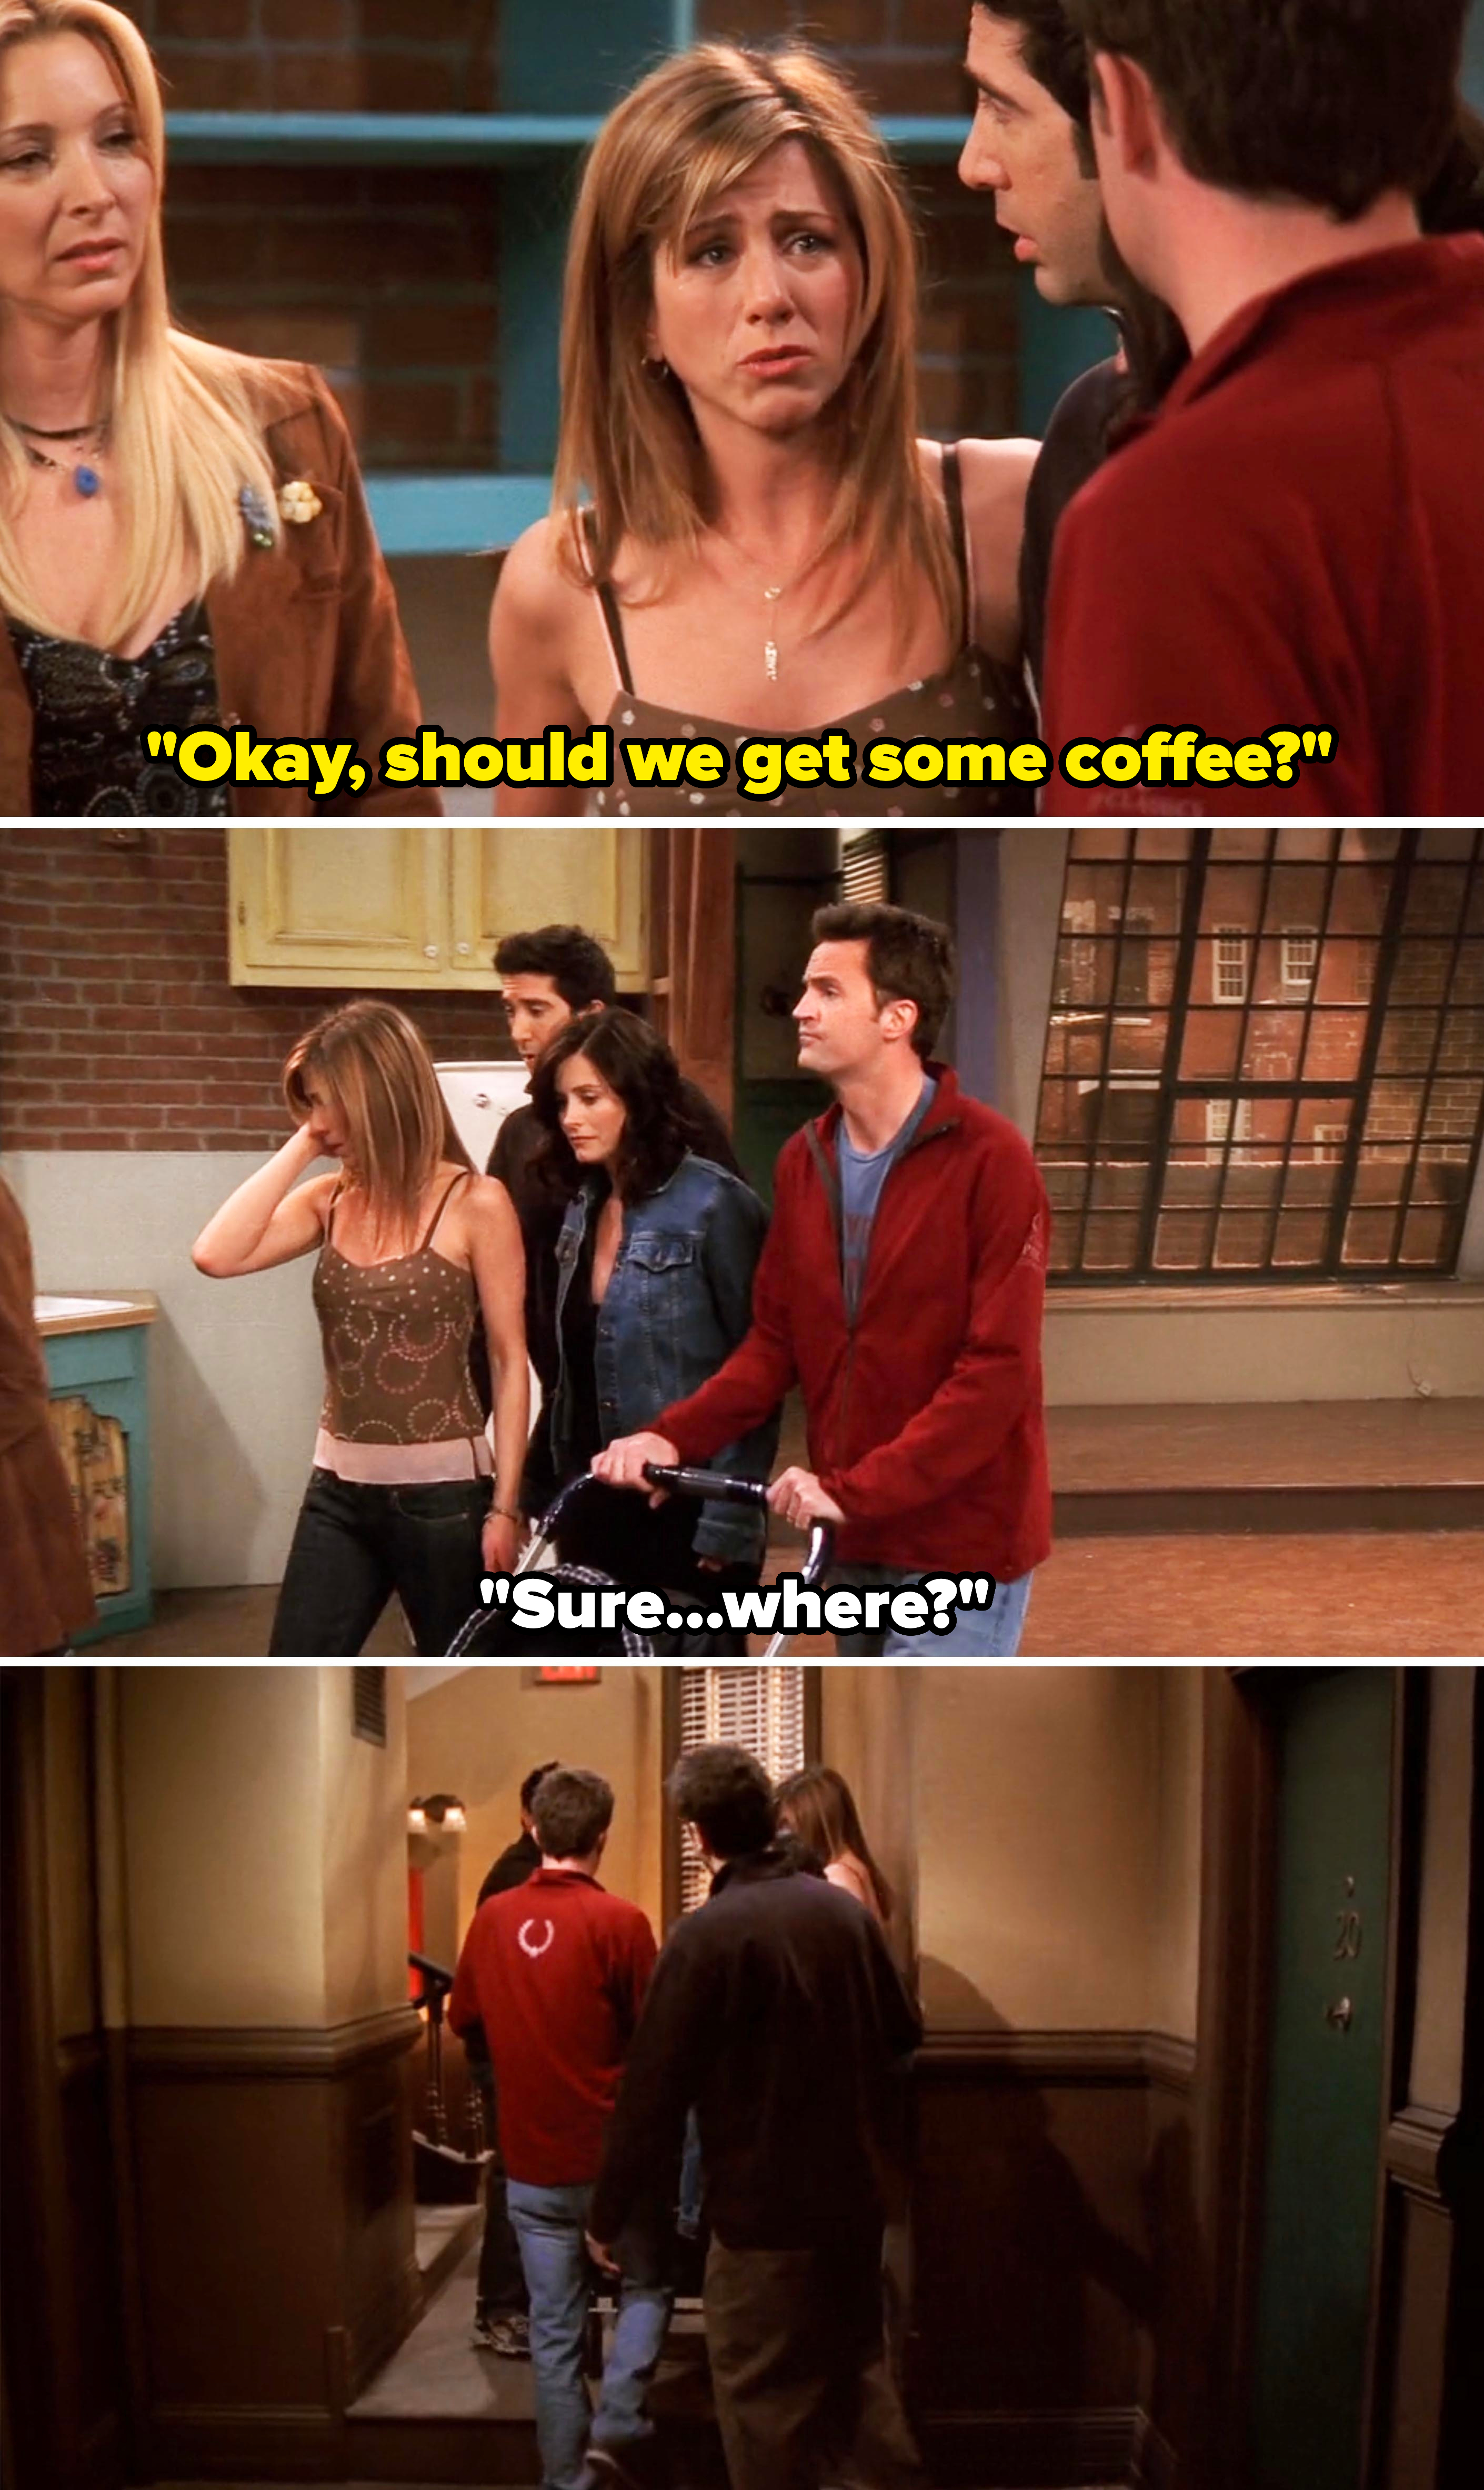 rachel asking if they should get coffee and chandler saying, sure where